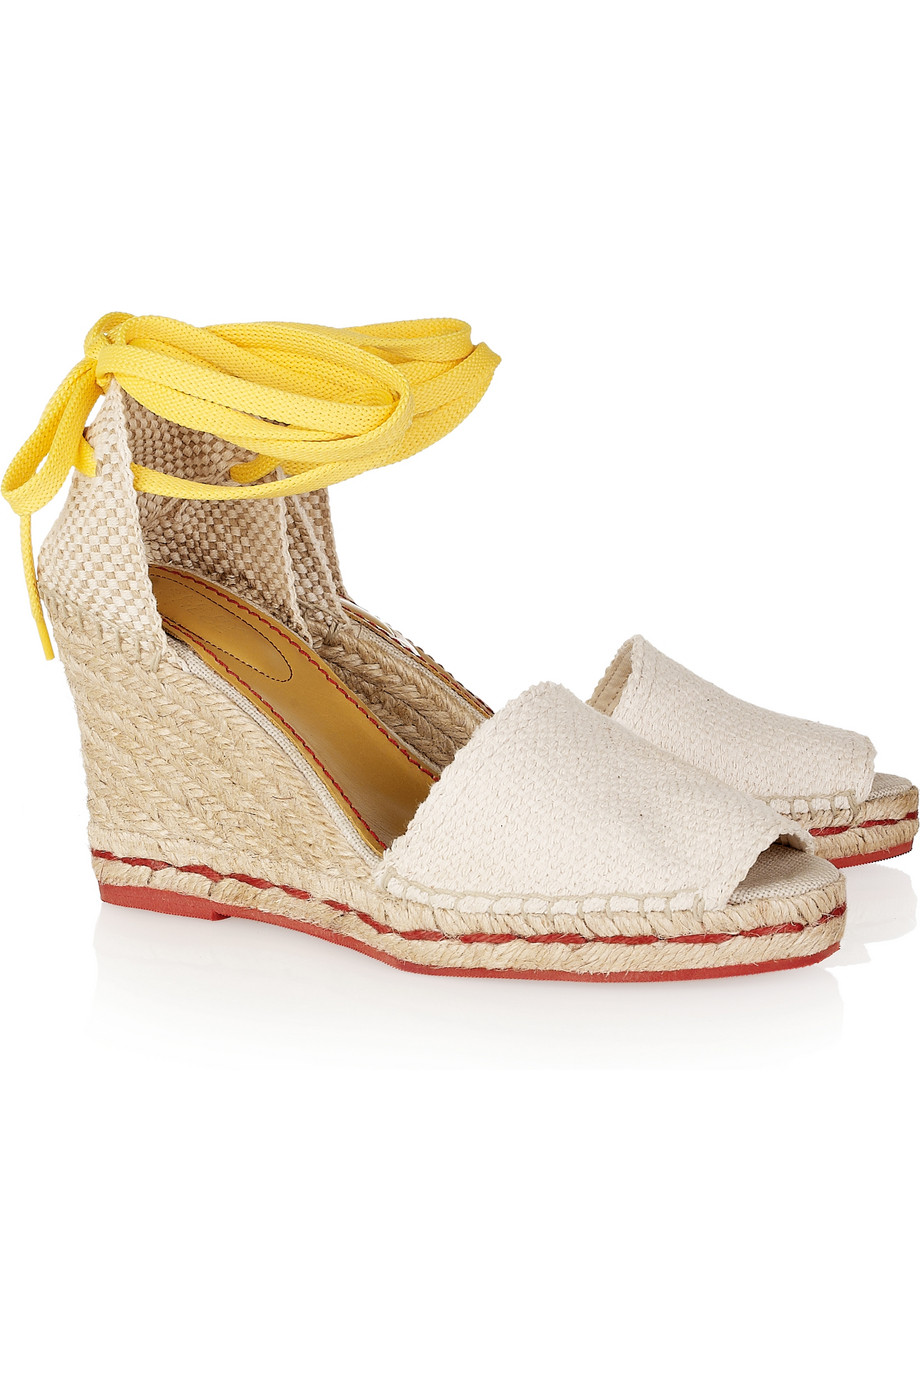 See By ChloÃ© Woven Canvas Wedge Espadrilles in White (cream) | Lyst